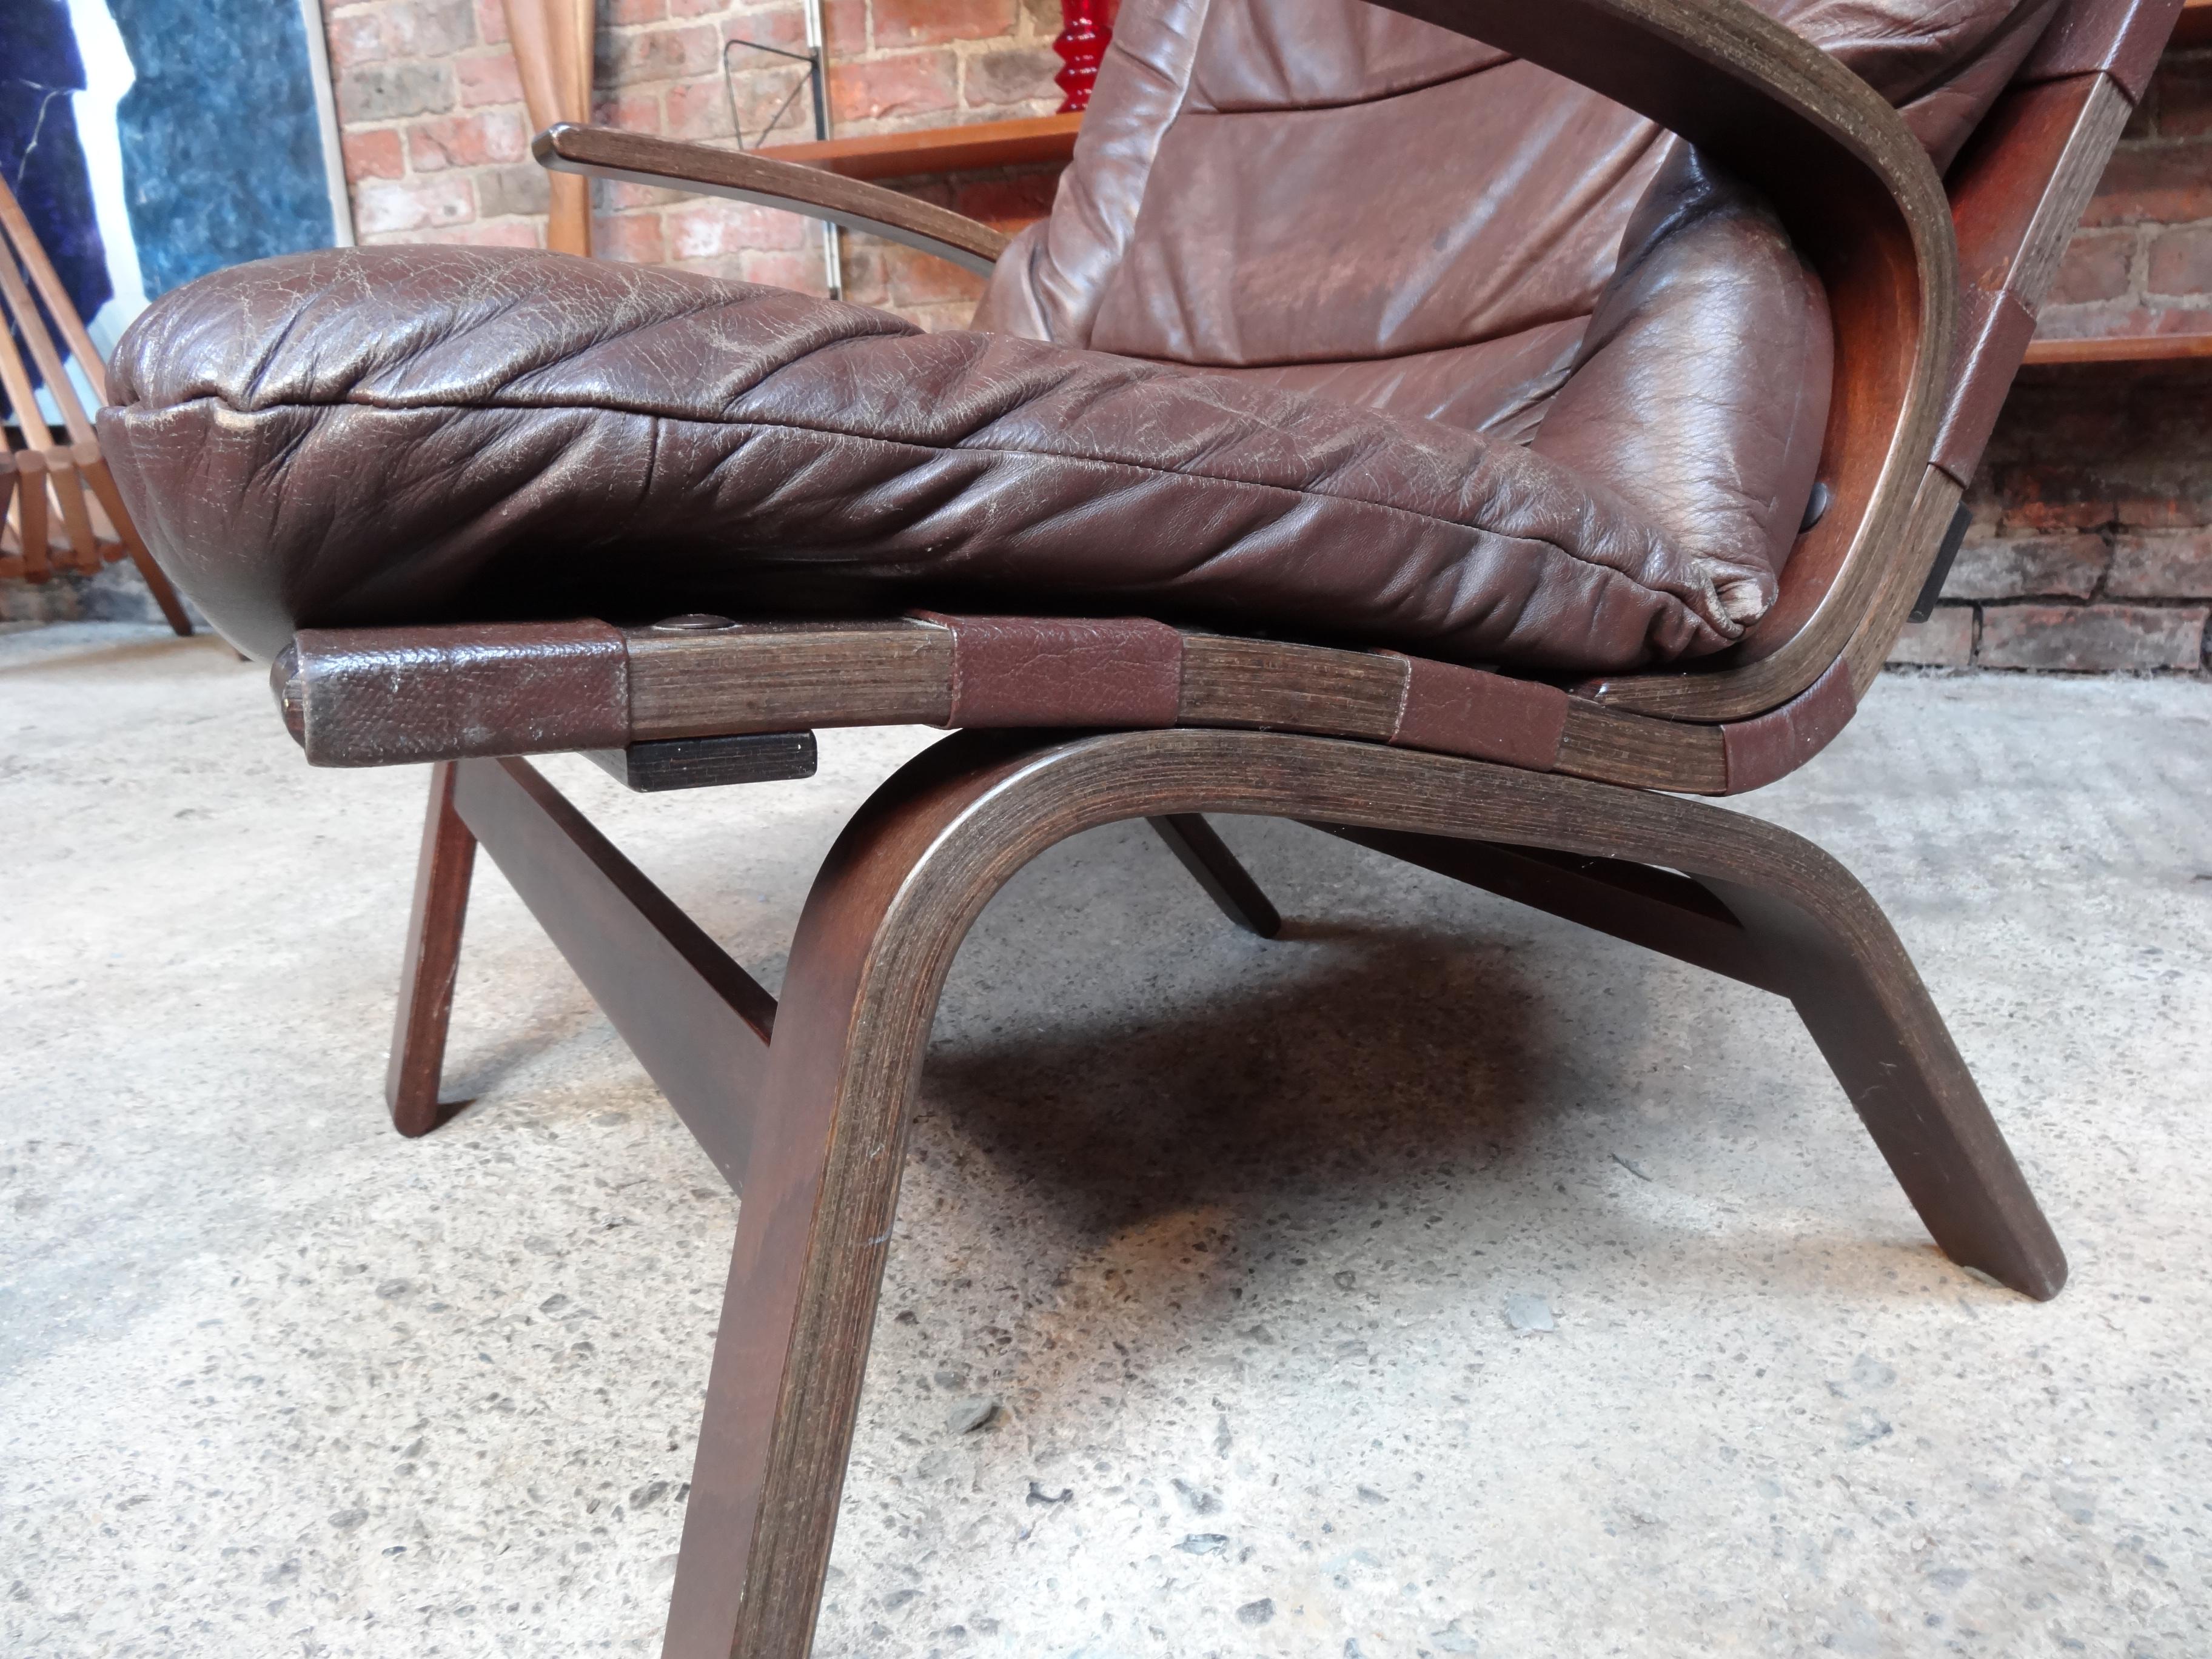 1970s Ingmar Relling chair, produced in Norway by the renowned 'Westnofa Møbelfabrikk' furniture makers, chair is covered in a brown leather, leather has a lovely patina and is in very good condition, very comfortable!!

Measures: Seat height